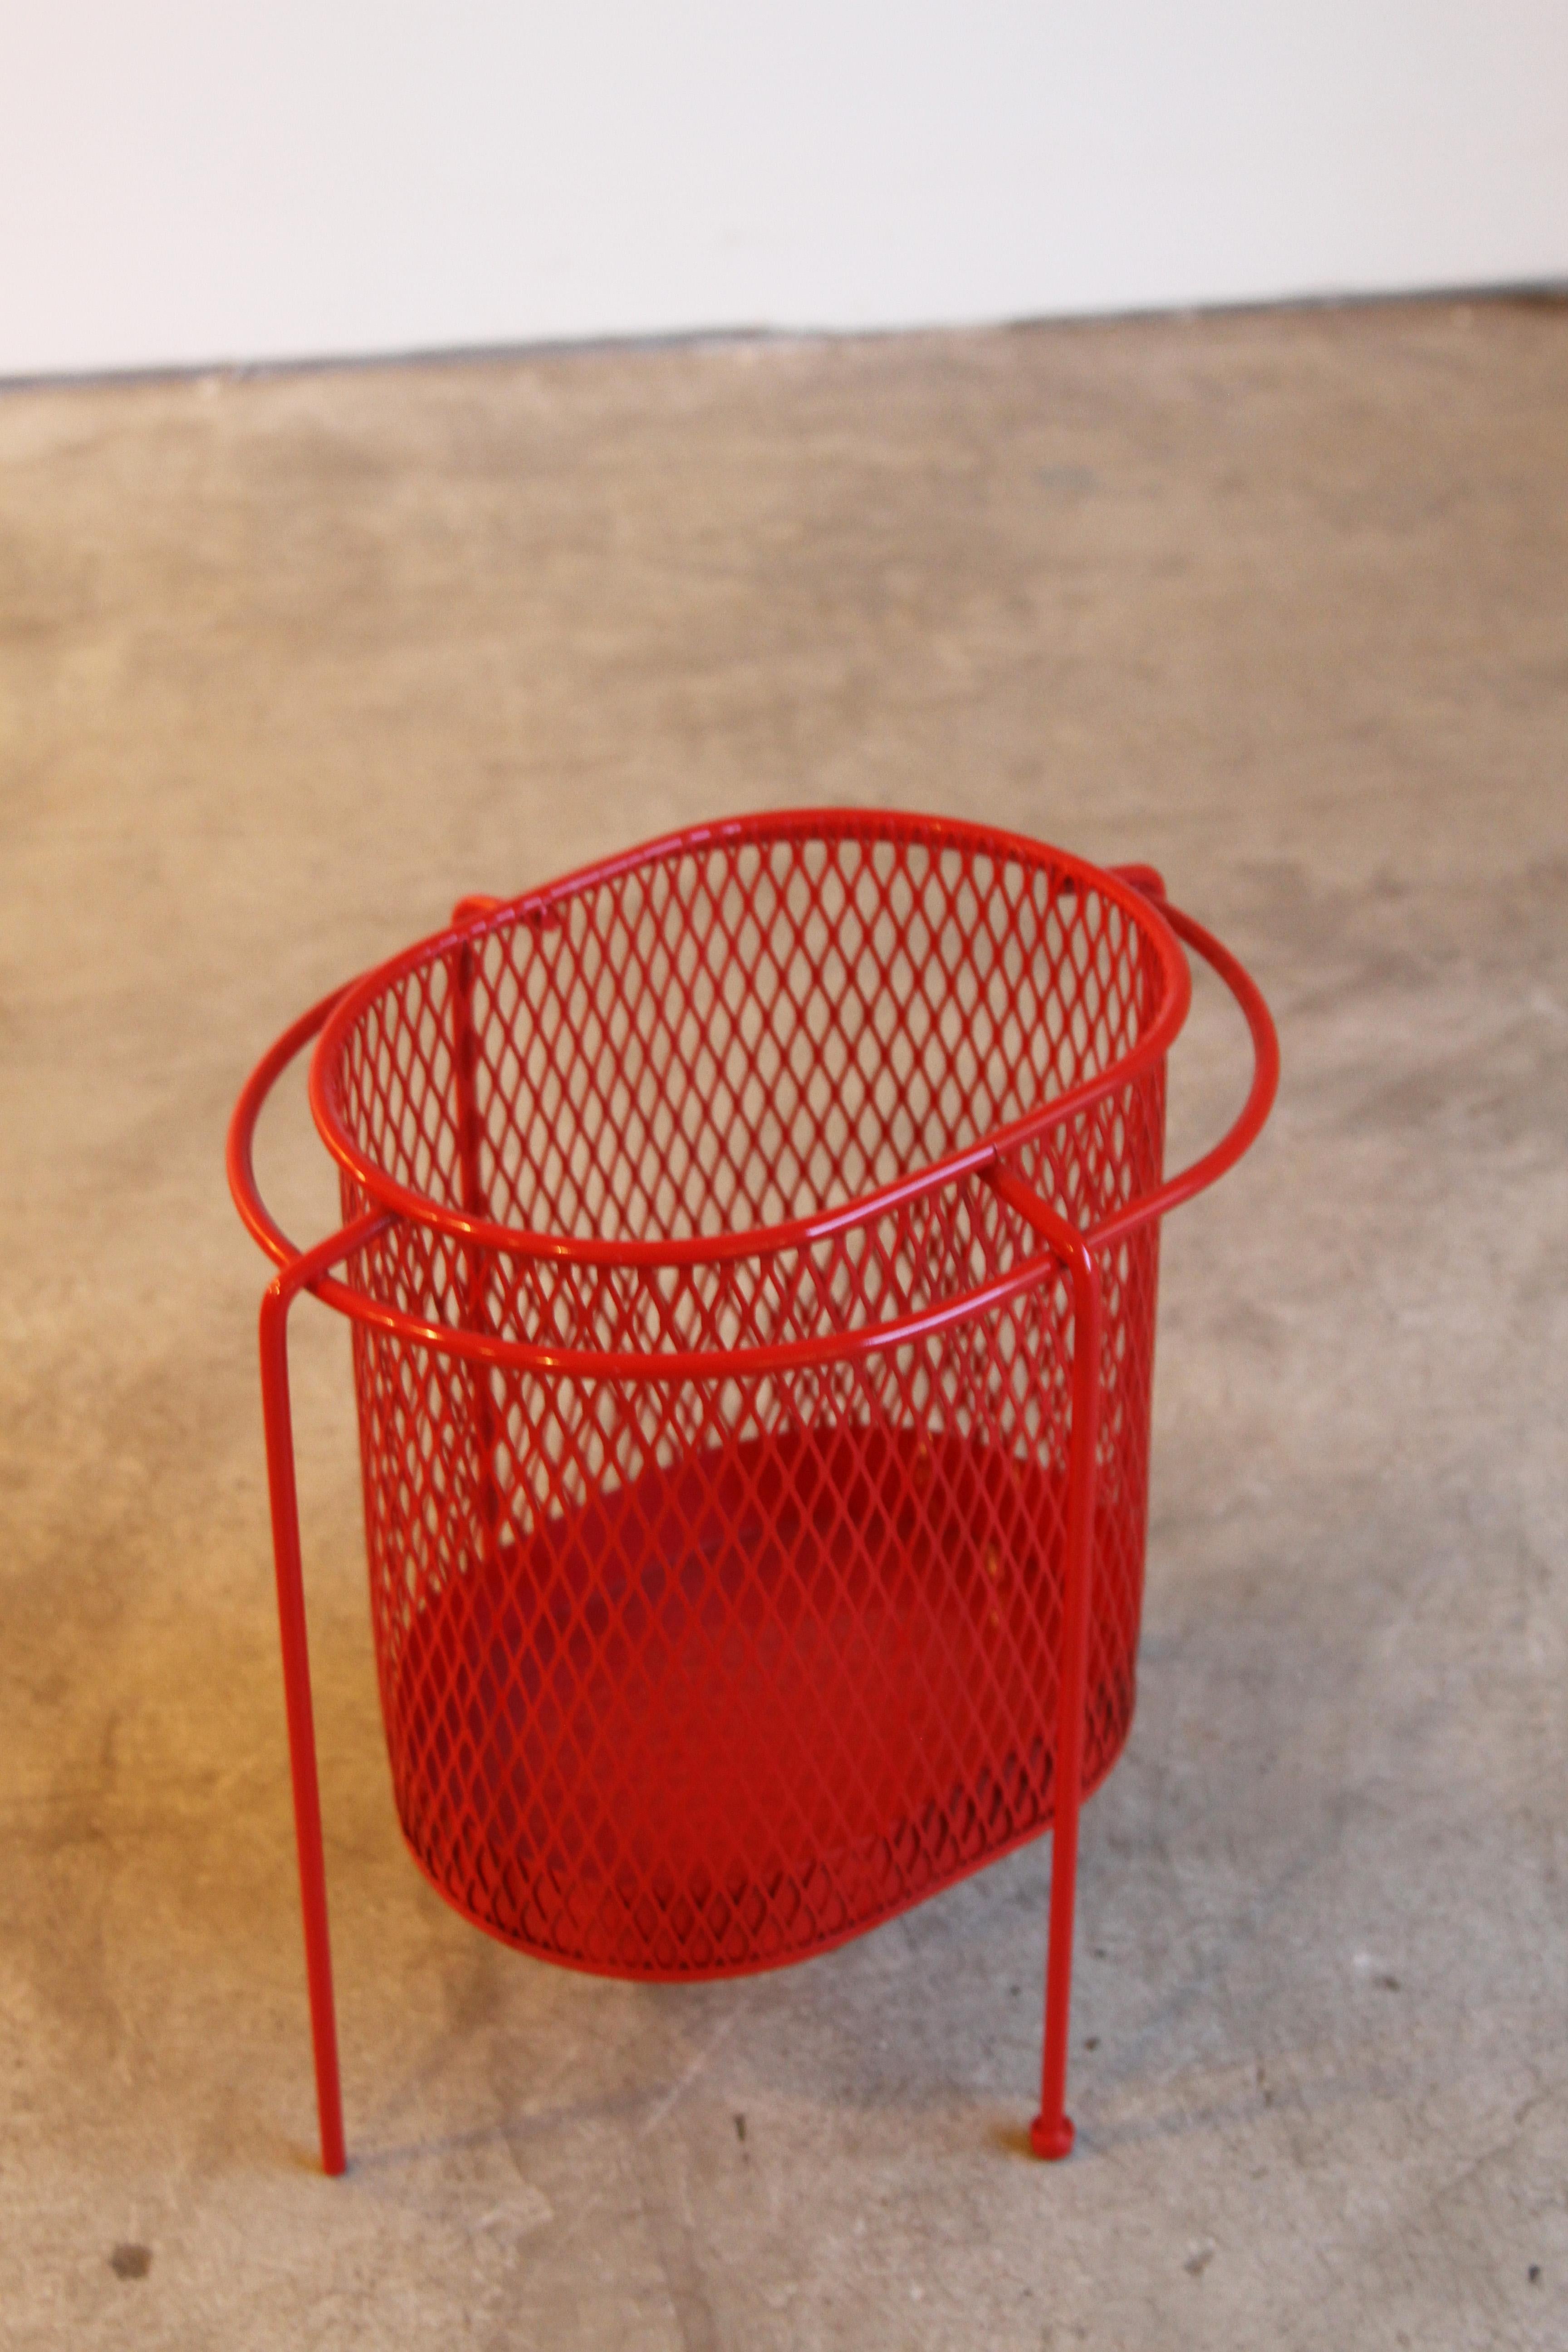 Anodized Wire Iron Modernist Waste Basket by Maurice Ducin, circa 1953